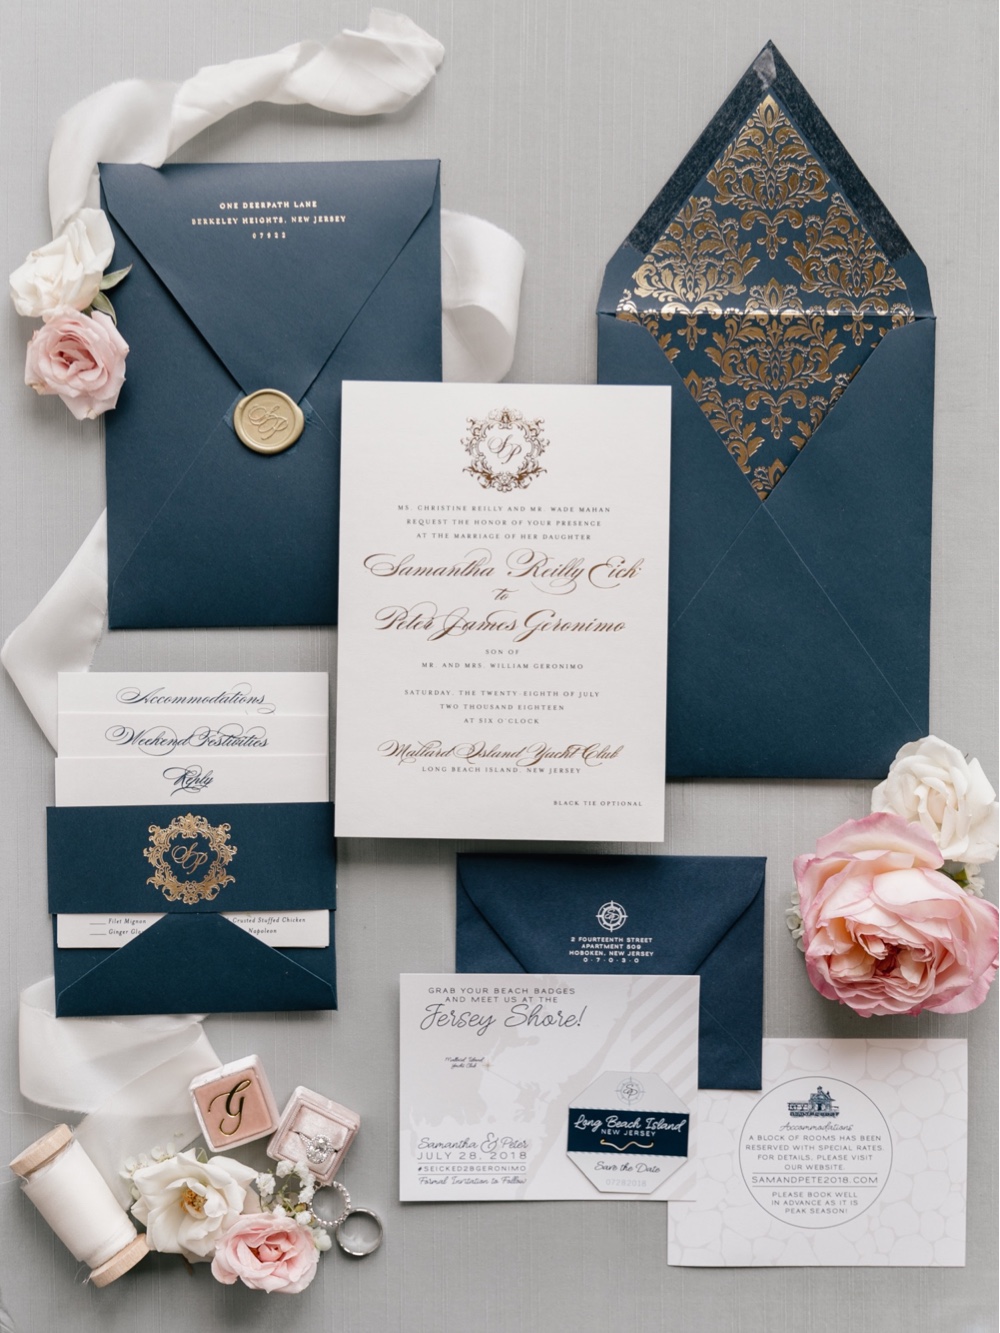 143 Blue And Gold Wedding Invitations Stationary Wedding Stationary Wedding Invitations